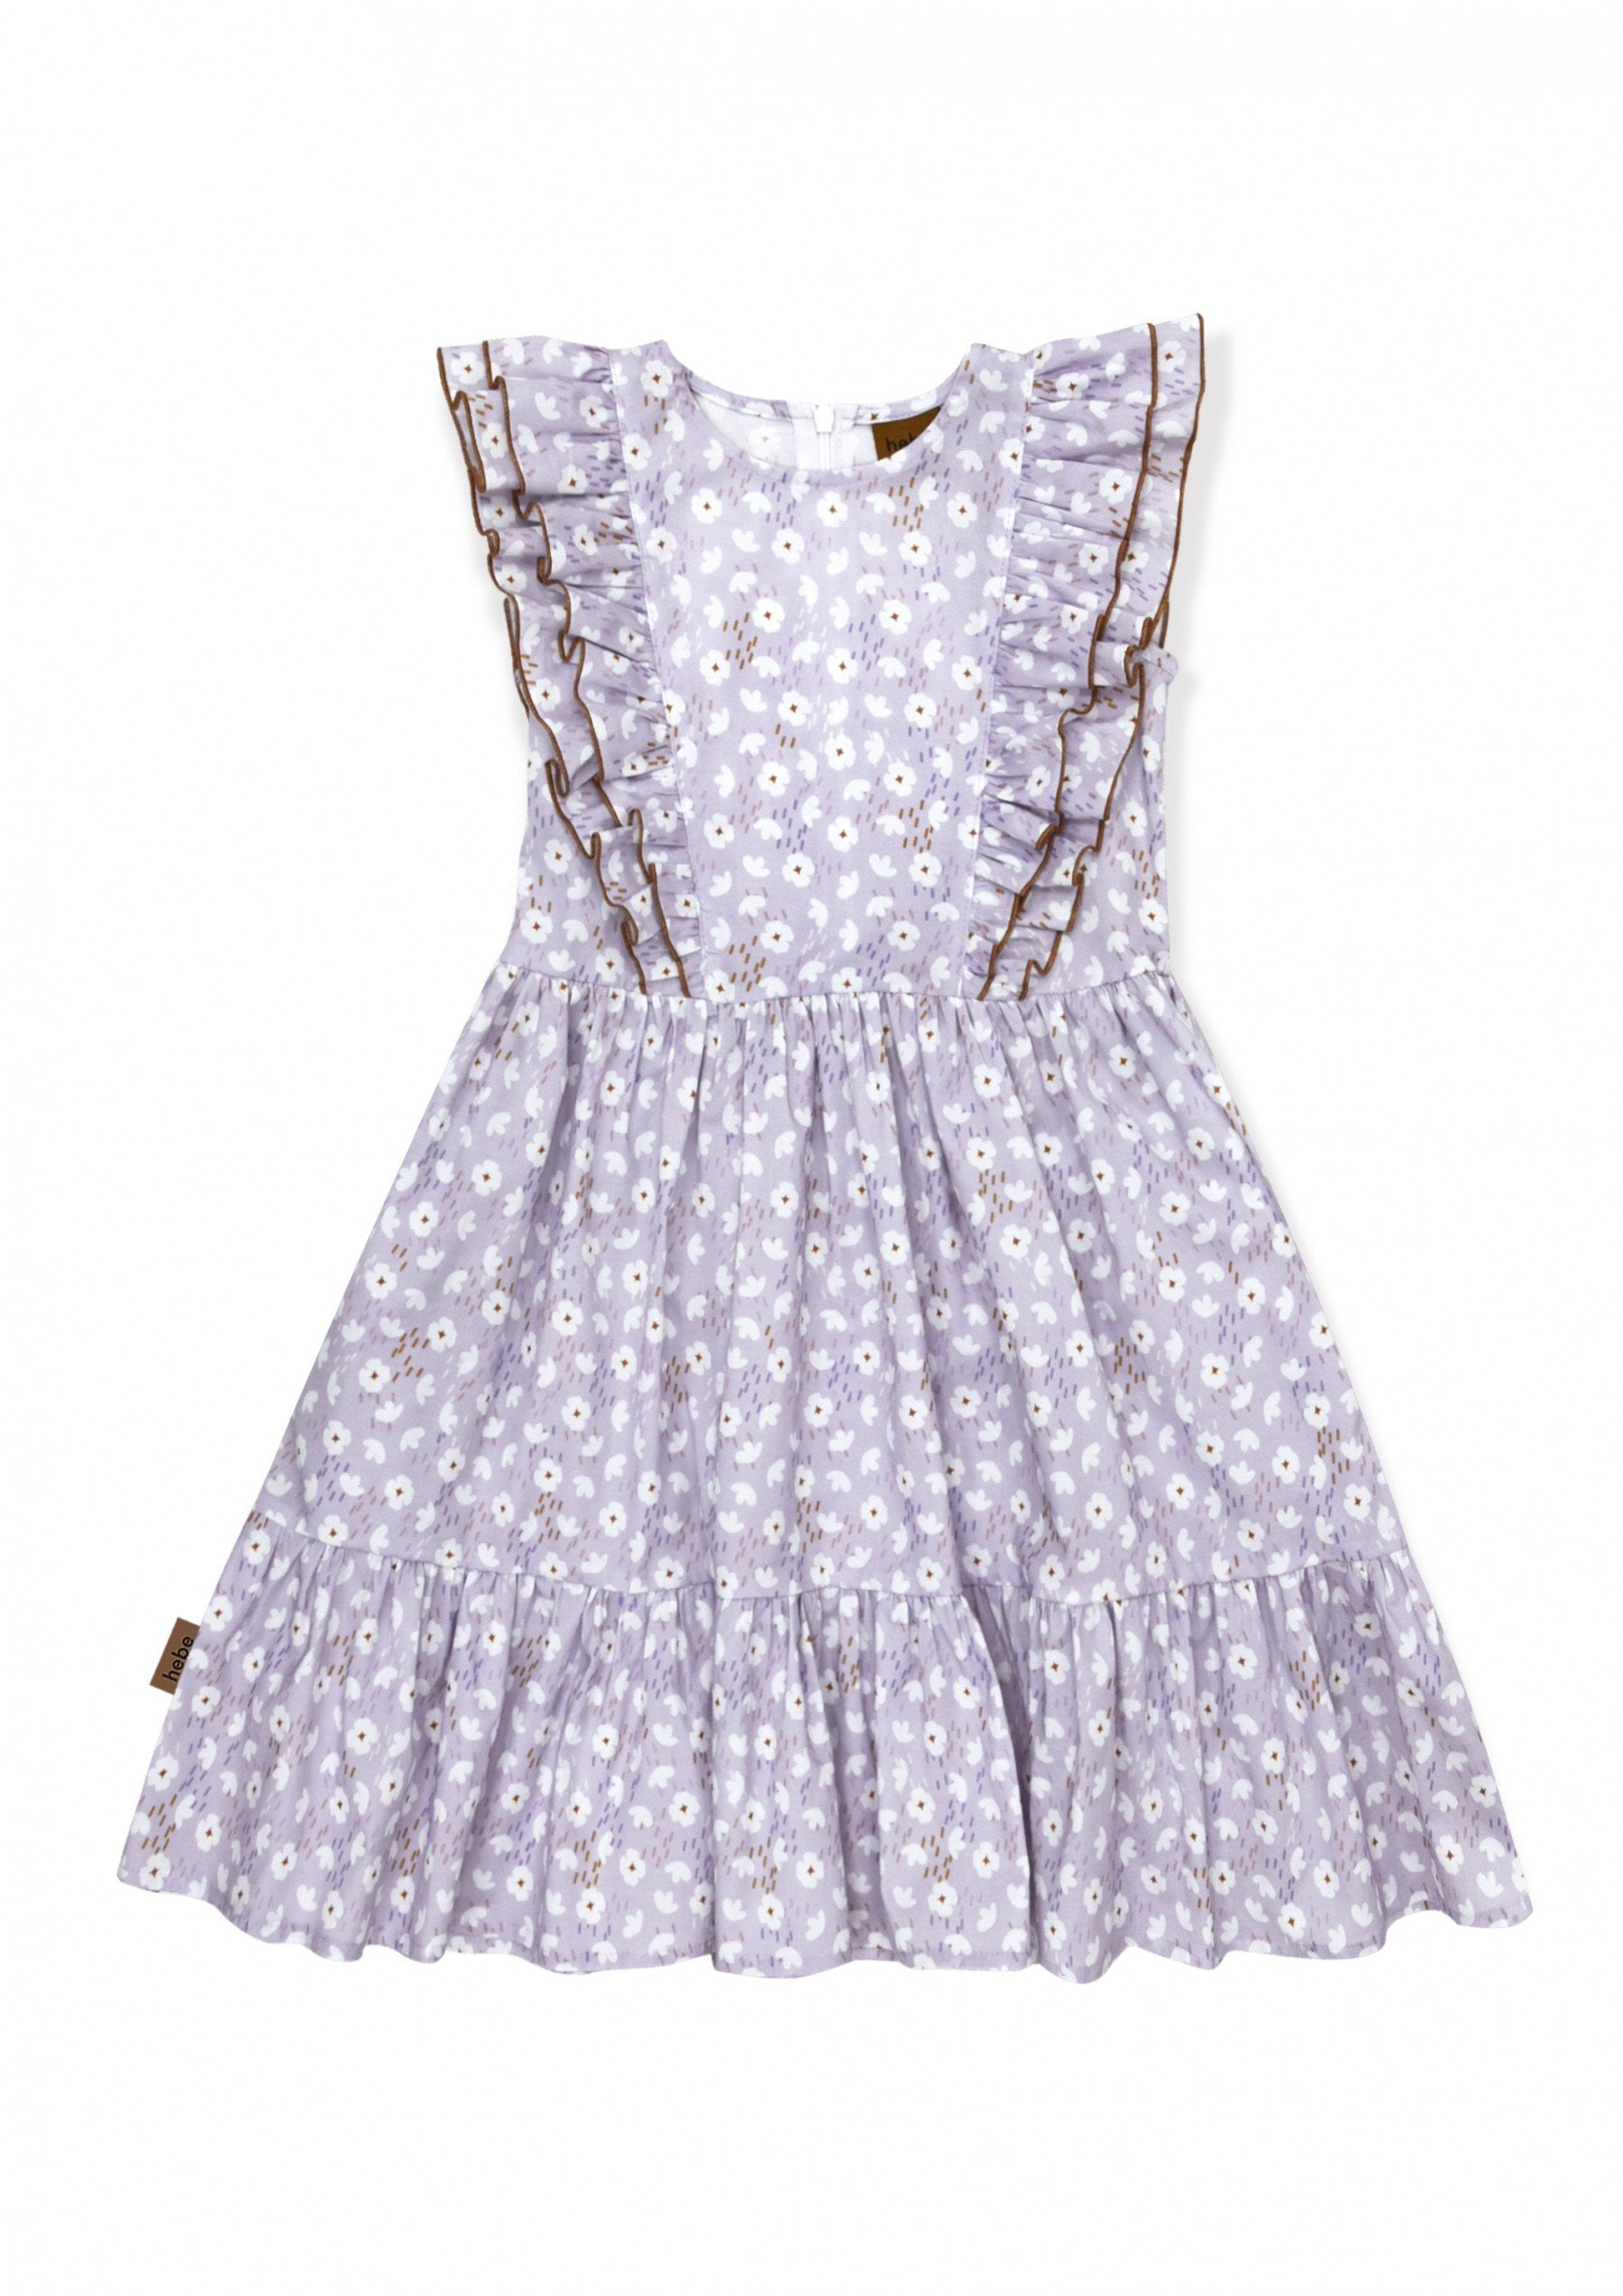 Hebe Dress - Violet with Flowers Print